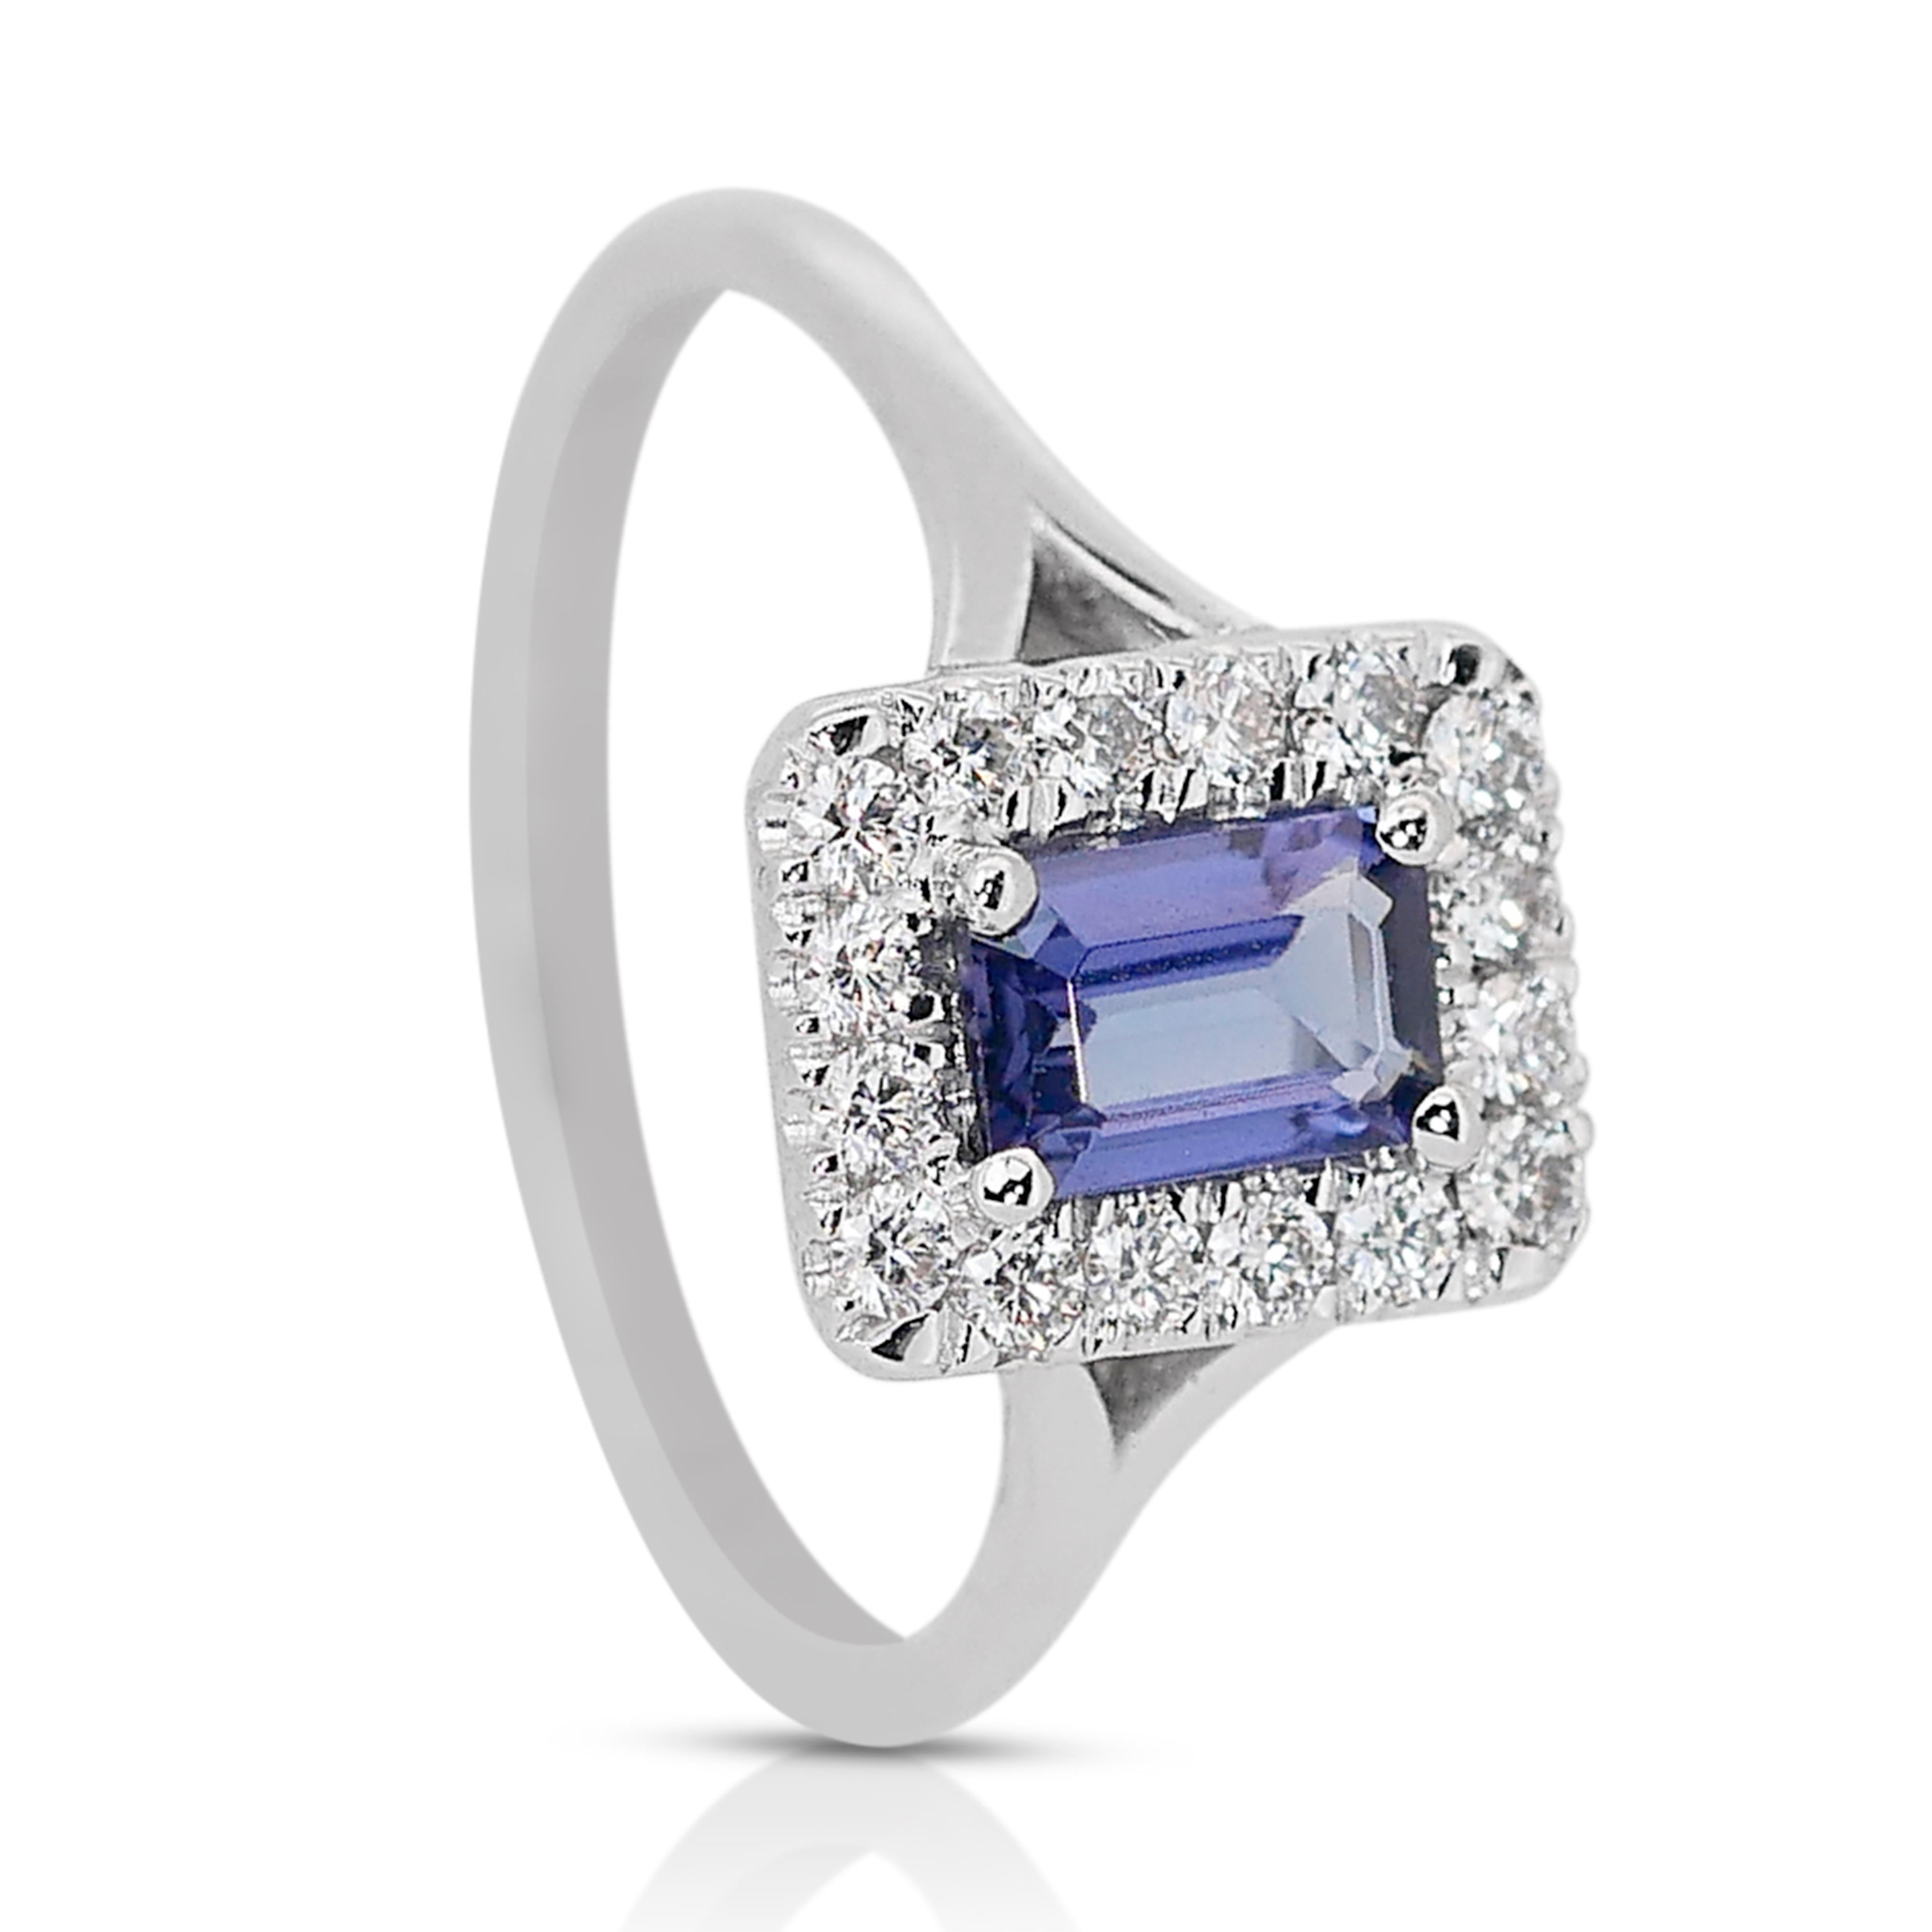 Emerald Cut Enchanting 0.93ct Tanzanite and Diamonds Halo Ring in 18k White Gold - IGI  For Sale